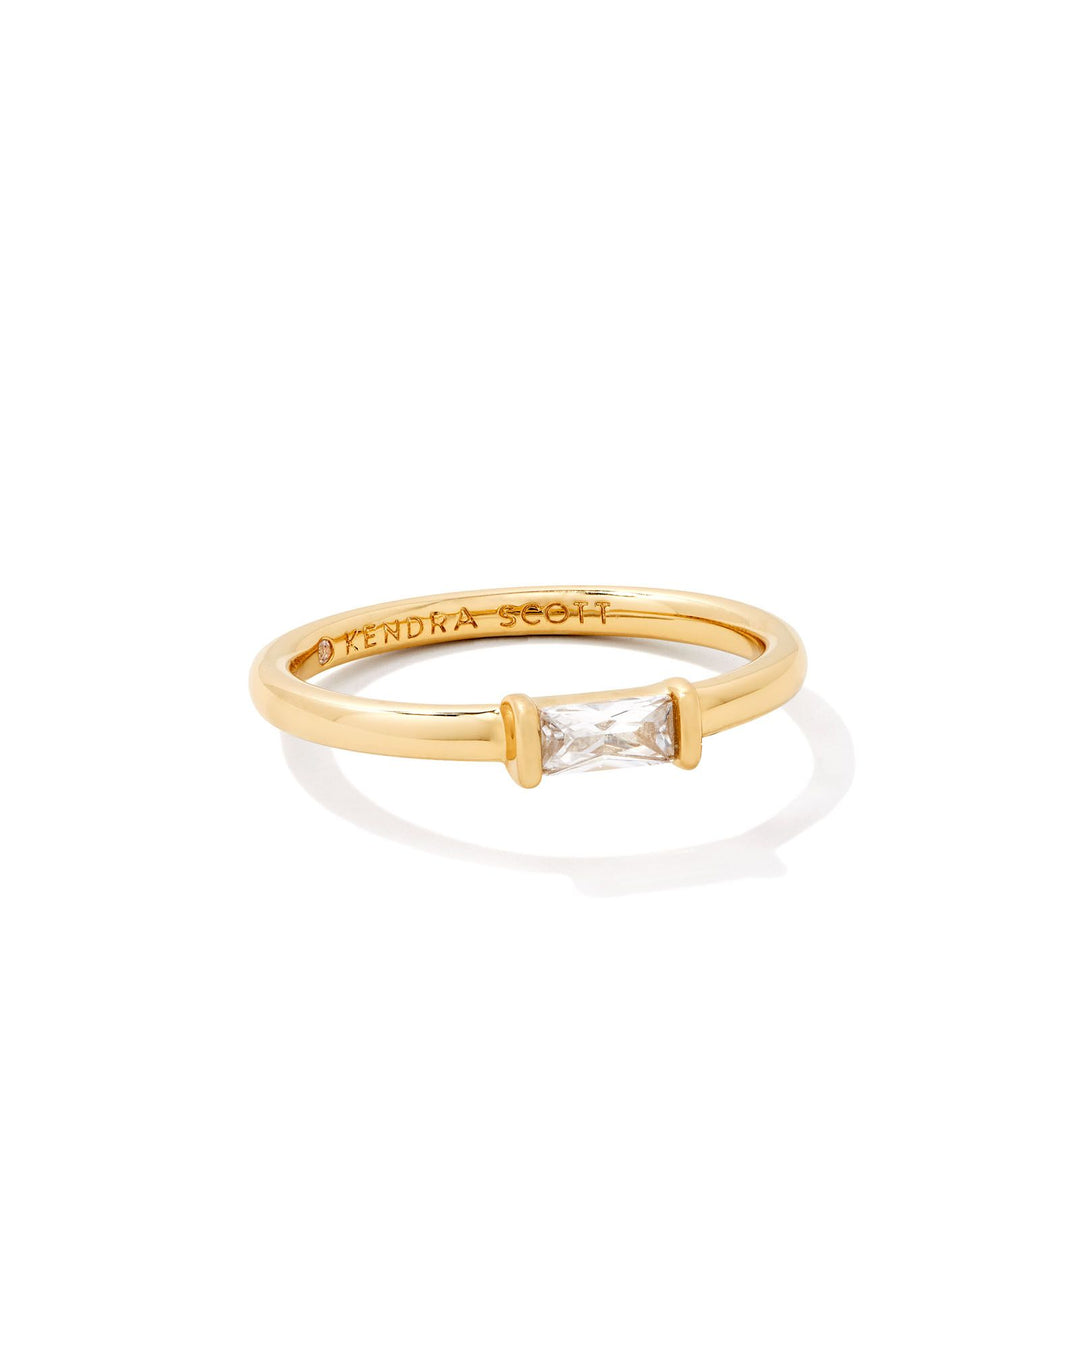 Kendra Scott Juliette Gold Band Ring in White Crystal